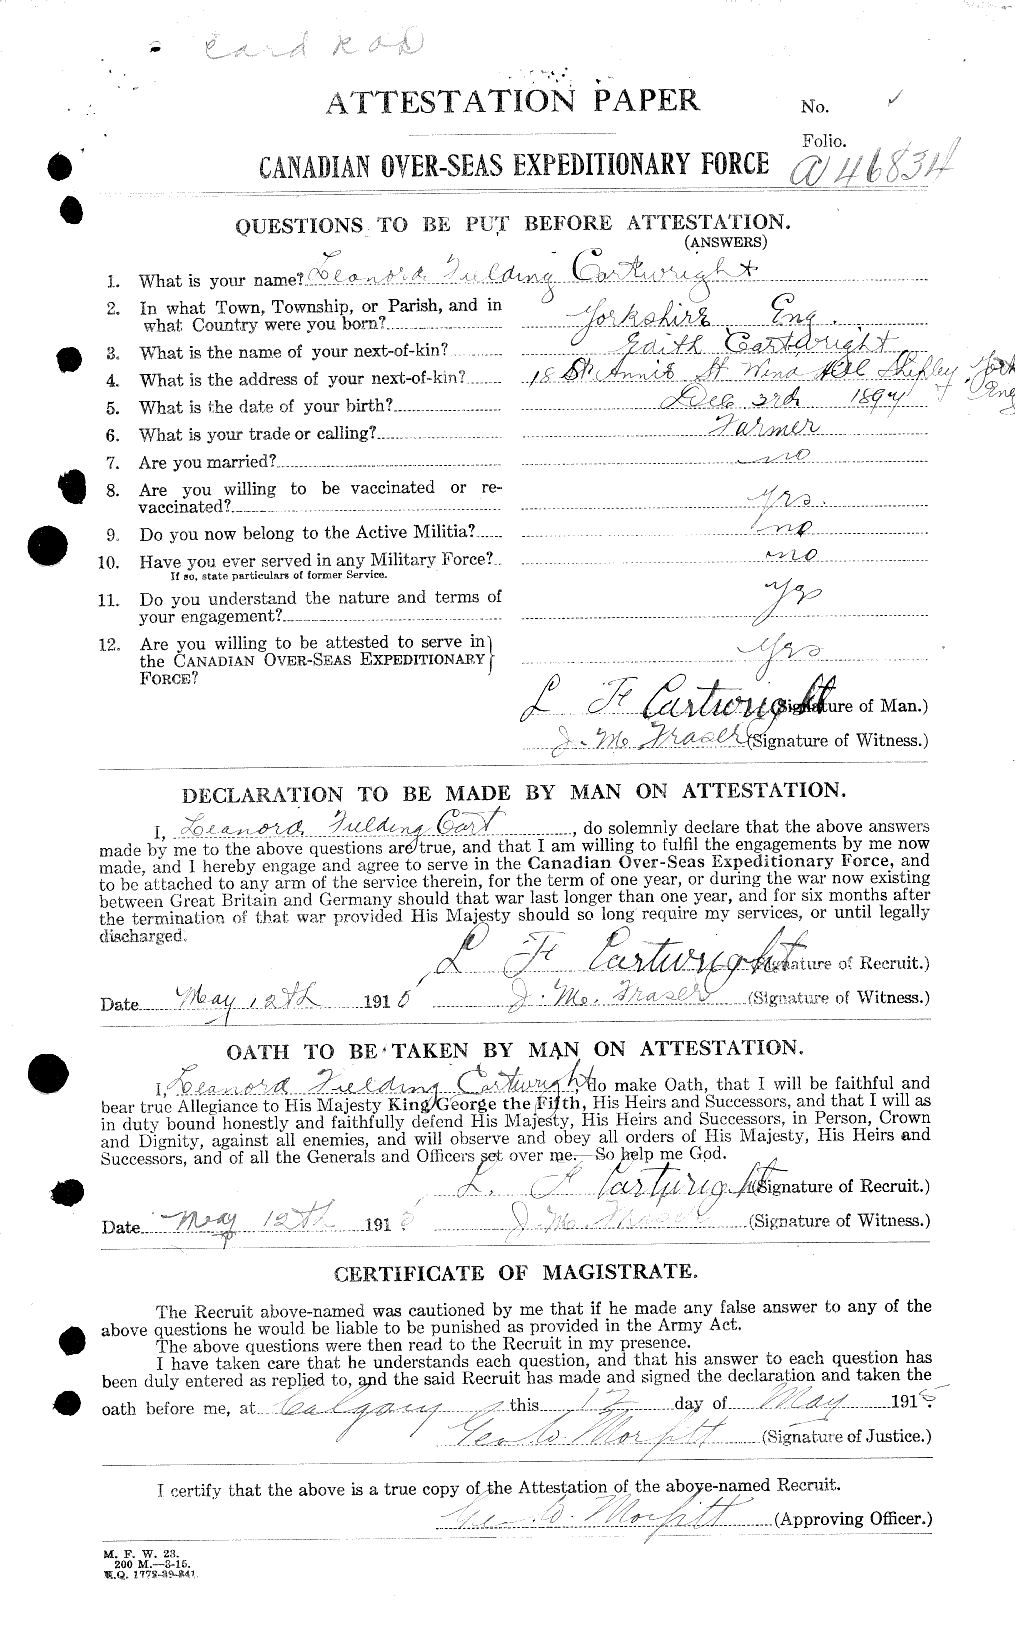 Personnel Records of the First World War - CEF 011608a